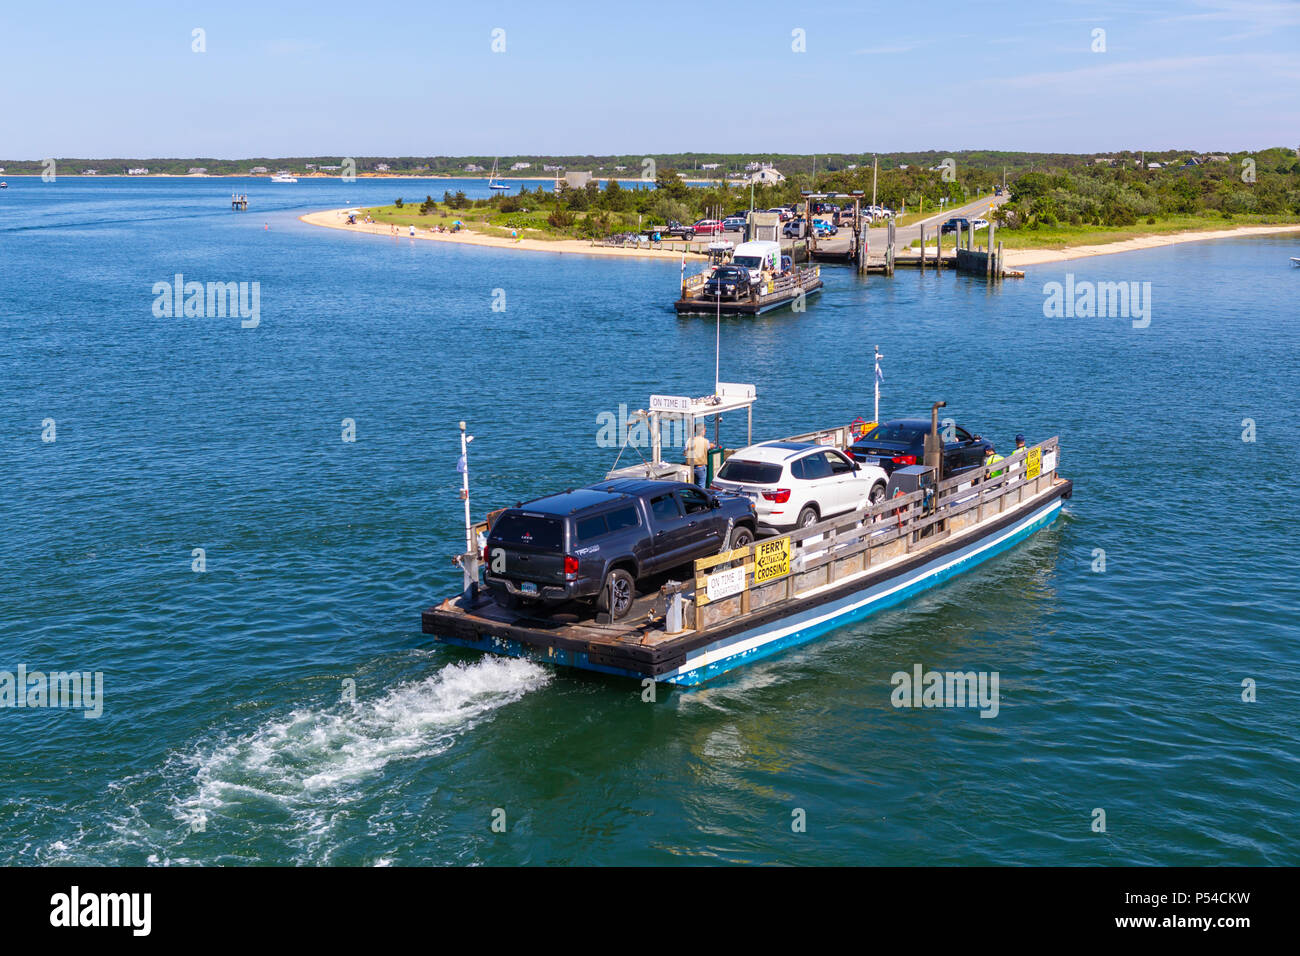 Two Chappy Ferries pass each other crossing the harbor between Chappaquiddick Island and downtown Edgartown, Massachusetts on Martha's Vineyard. Stock Photo